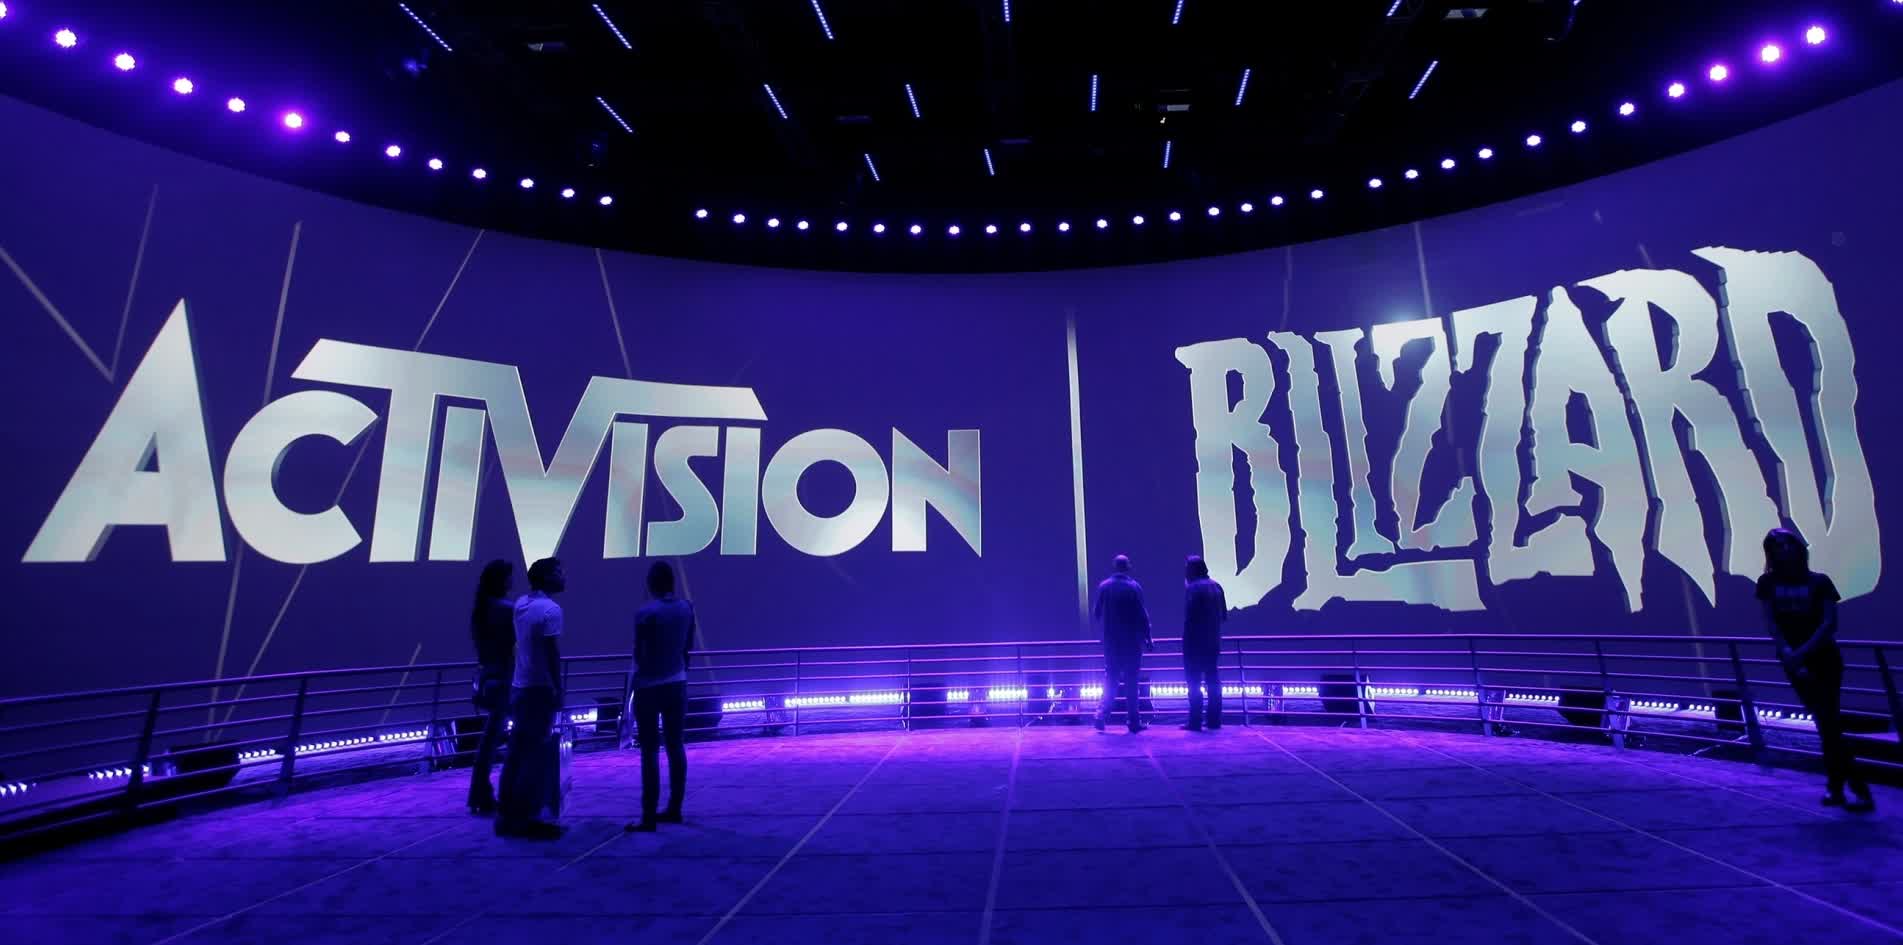 Microsoft's Activision Blizzard acquisition faces closer examination from the EU